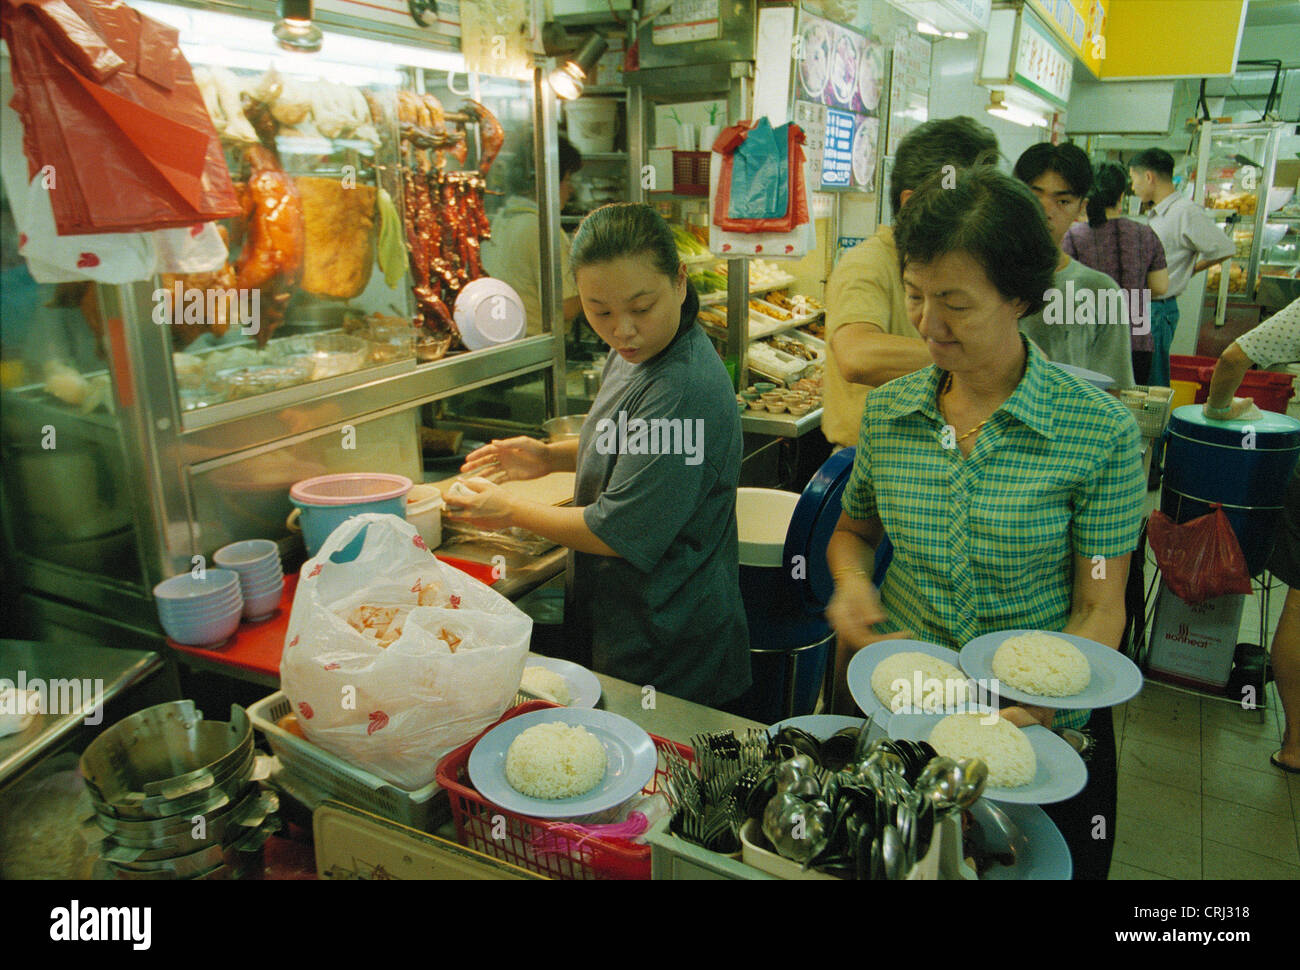 Food distribution in a Hawkerrestaurant with Chinese cuisine, Singapore Stock Photo